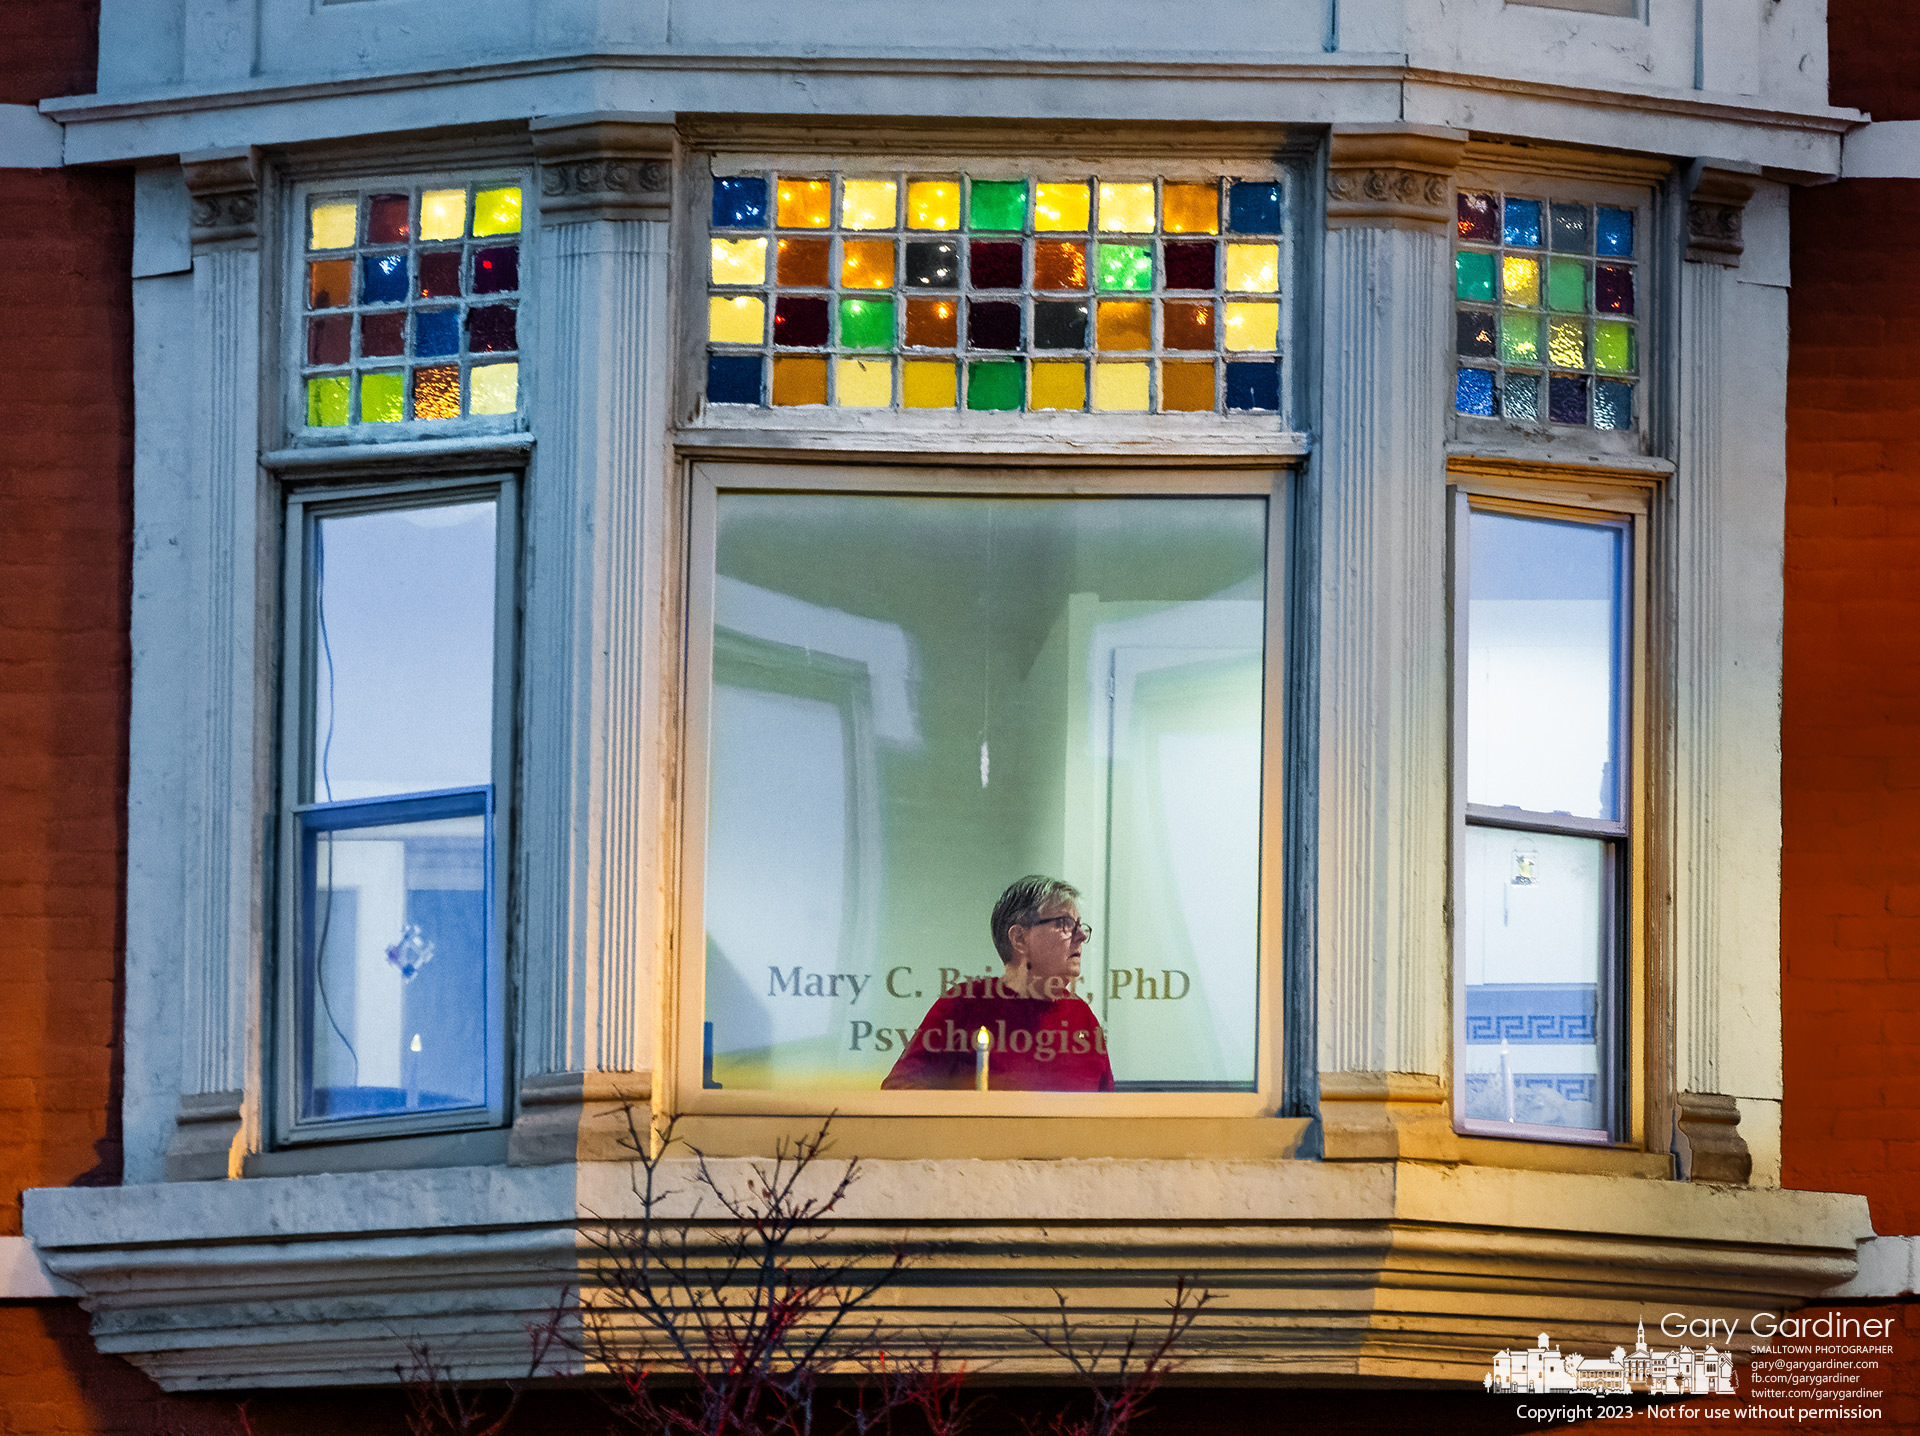 Psychologist Mary Bricker stands at one of the windows in her second-floor offices in the Holmes Hotel where the stained-glass portions of her windows are illuminated with lights during the Christmas season. My Final Photo for December 13, 2023.